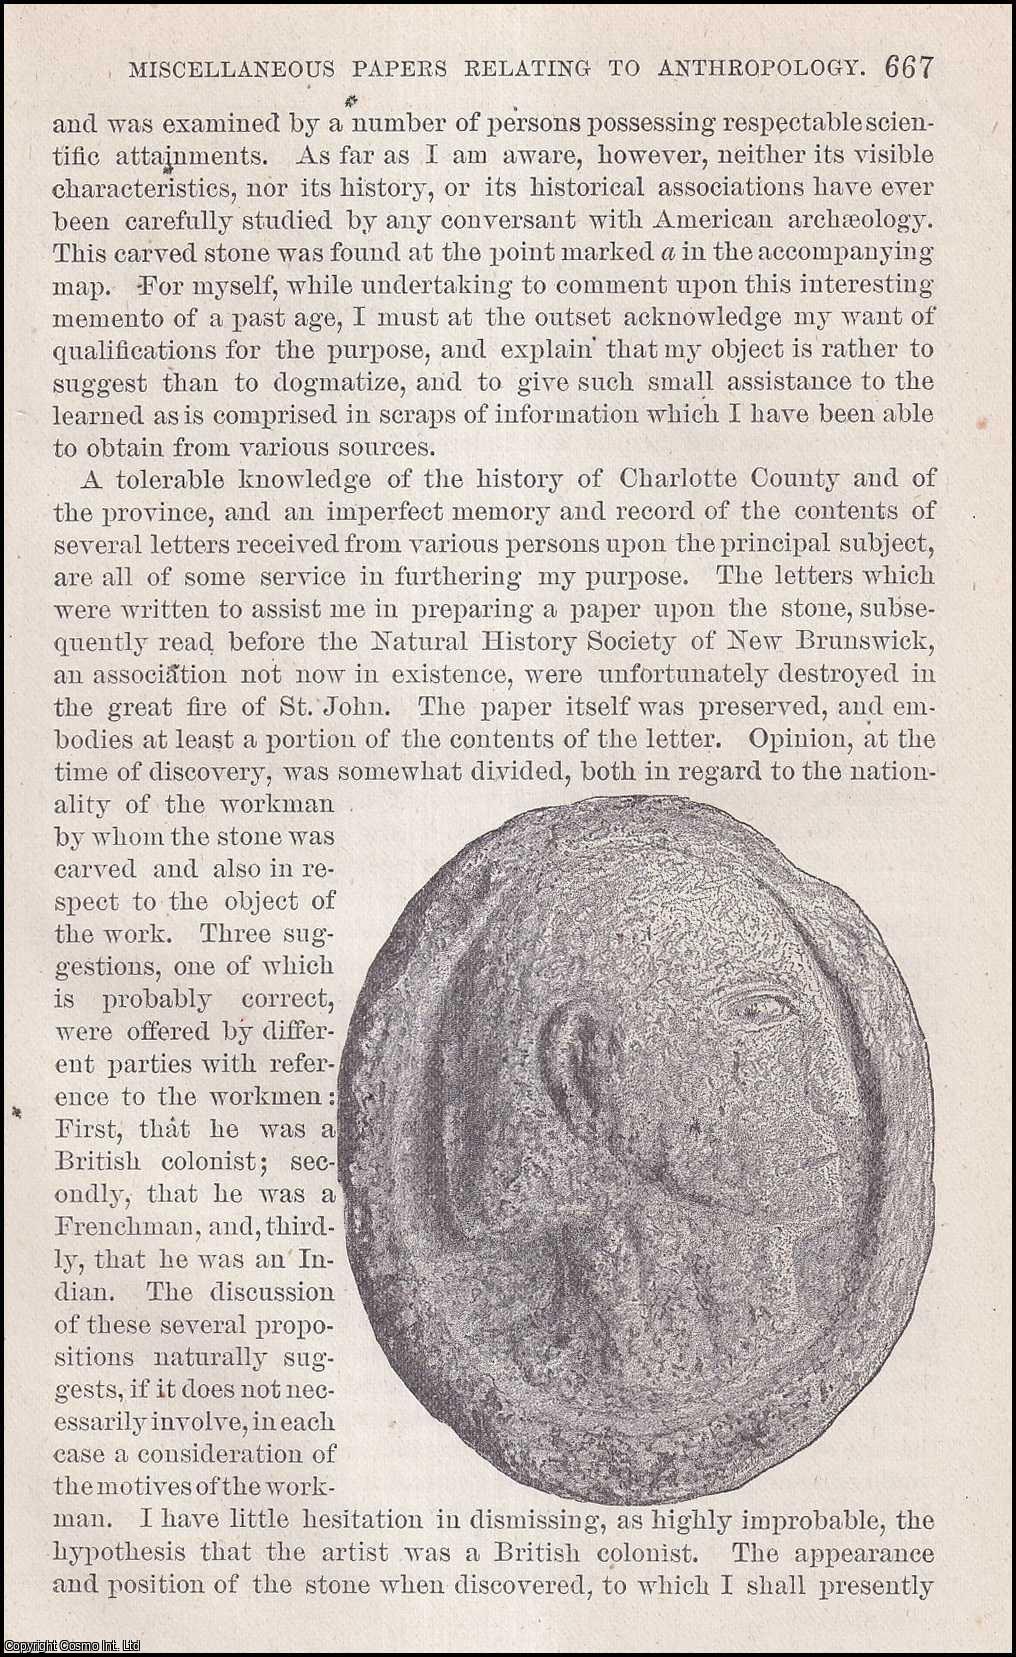 J. Allen Jack - A Sculptured Stone found in St. George, New Brunswick. An original article from the Report of the Smithsonian Institution, 1881.